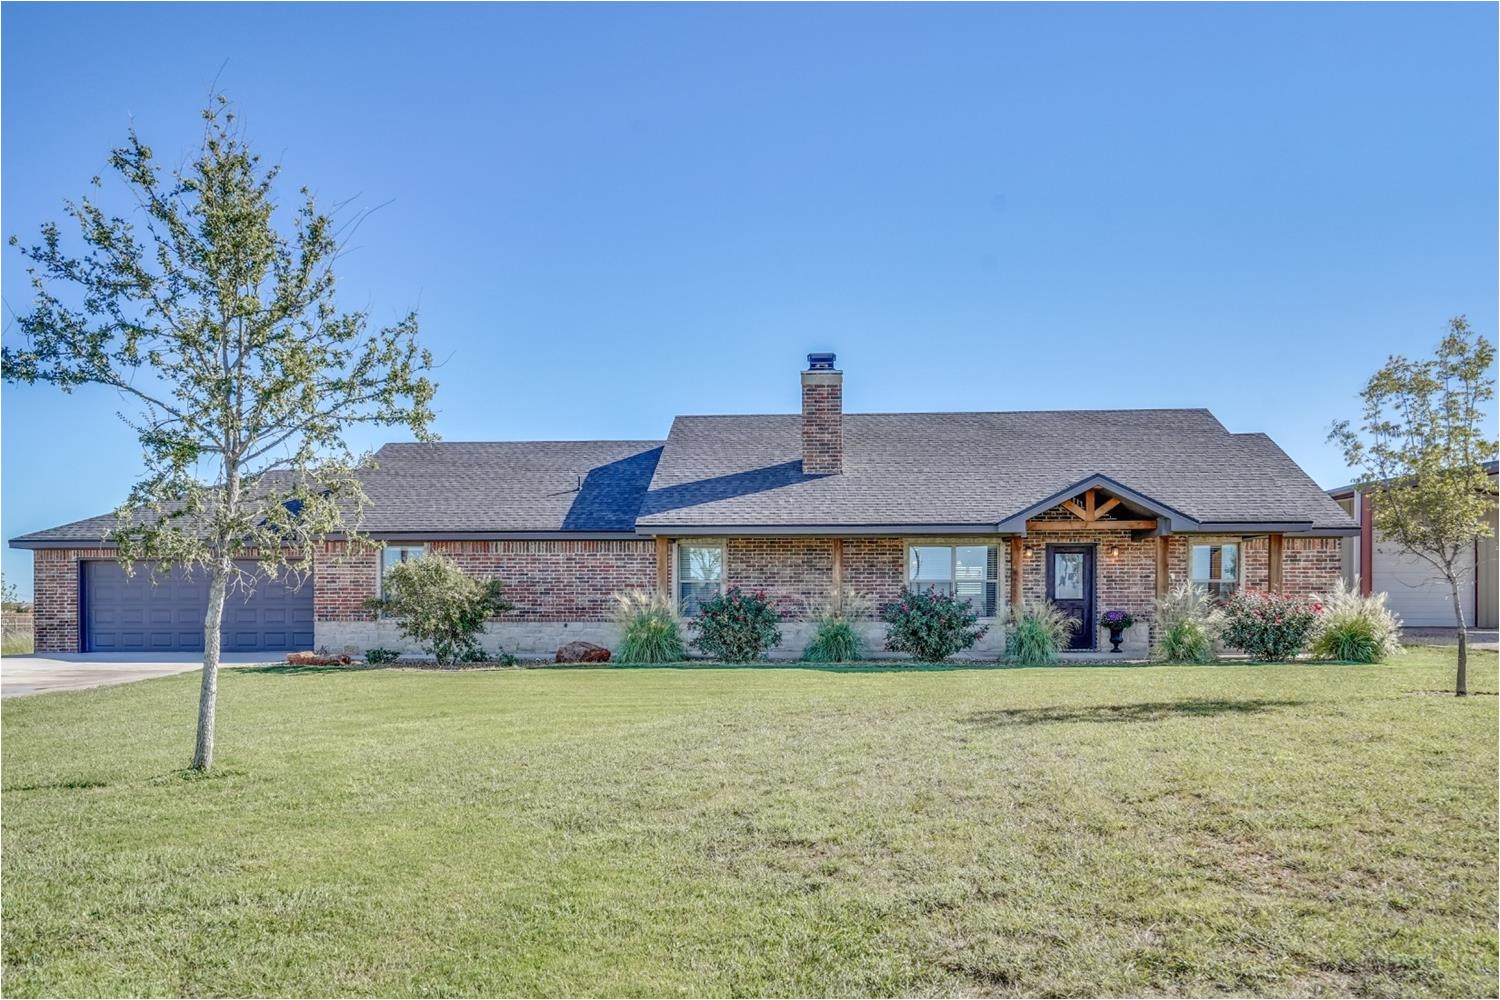 8317 county road 6000 shallowater tx mls 201808631 lubbock homes for sale property search in lubbock